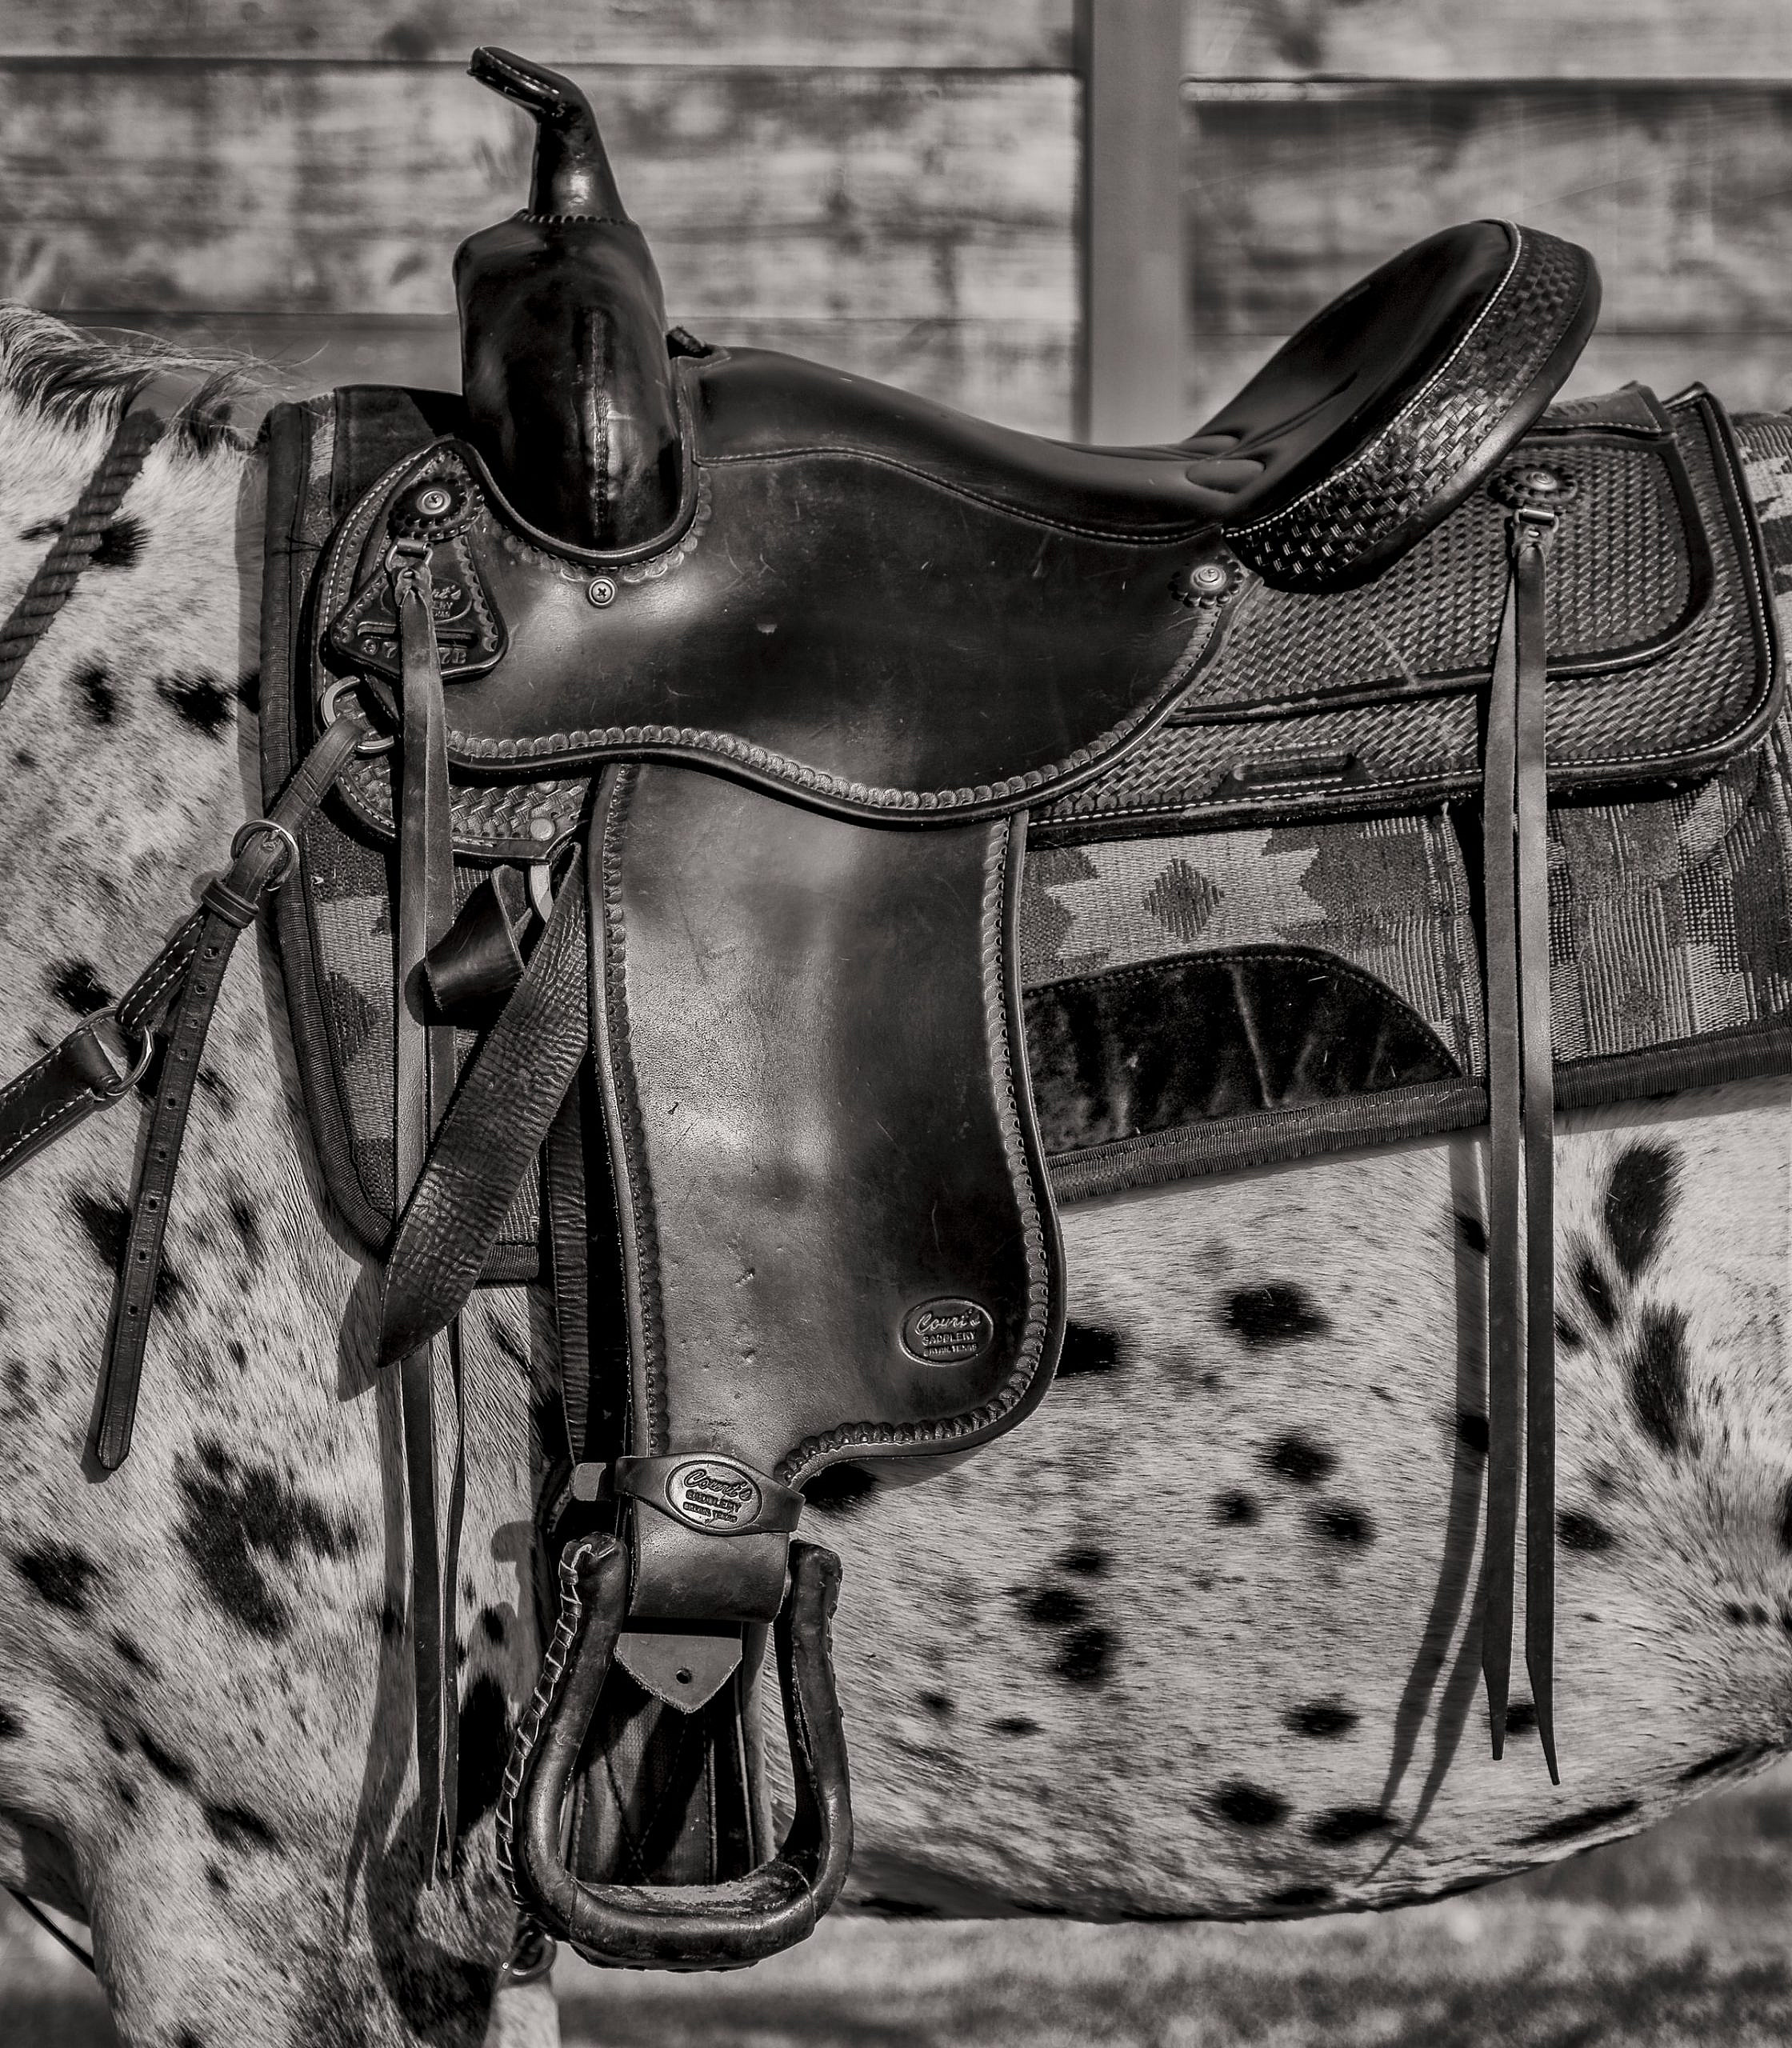 Saddle up! A look at the history and craftmanship of saddlery